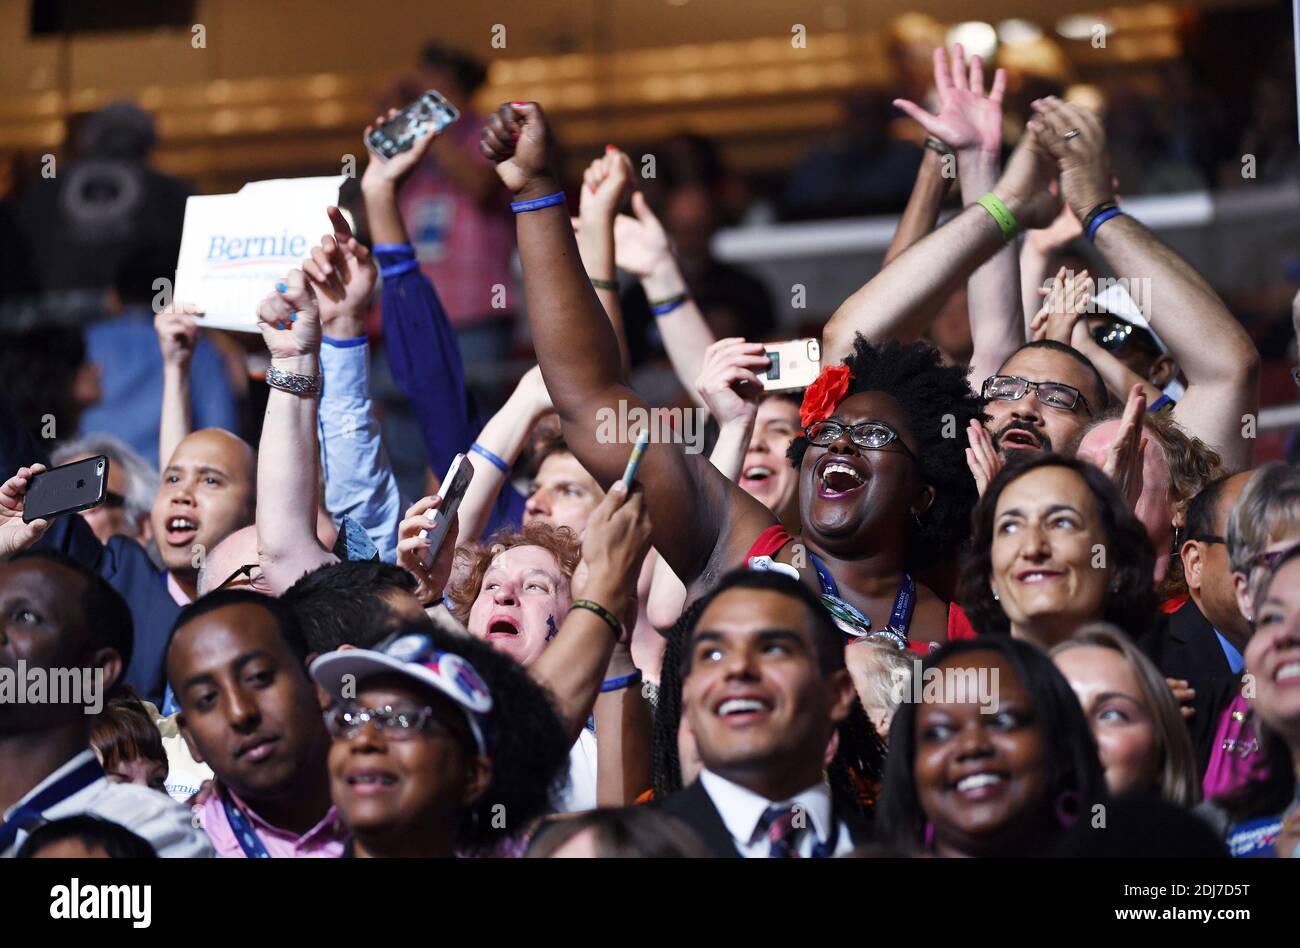 Delegates cheer during the Roll Call vote on the second day of the Democratic National Convention on July 26, 2016 at the Wells Fargo Center, Philadelphia, Pennsylvania,Photo by Olivier Douliery/Abacapress.com Stock Photo